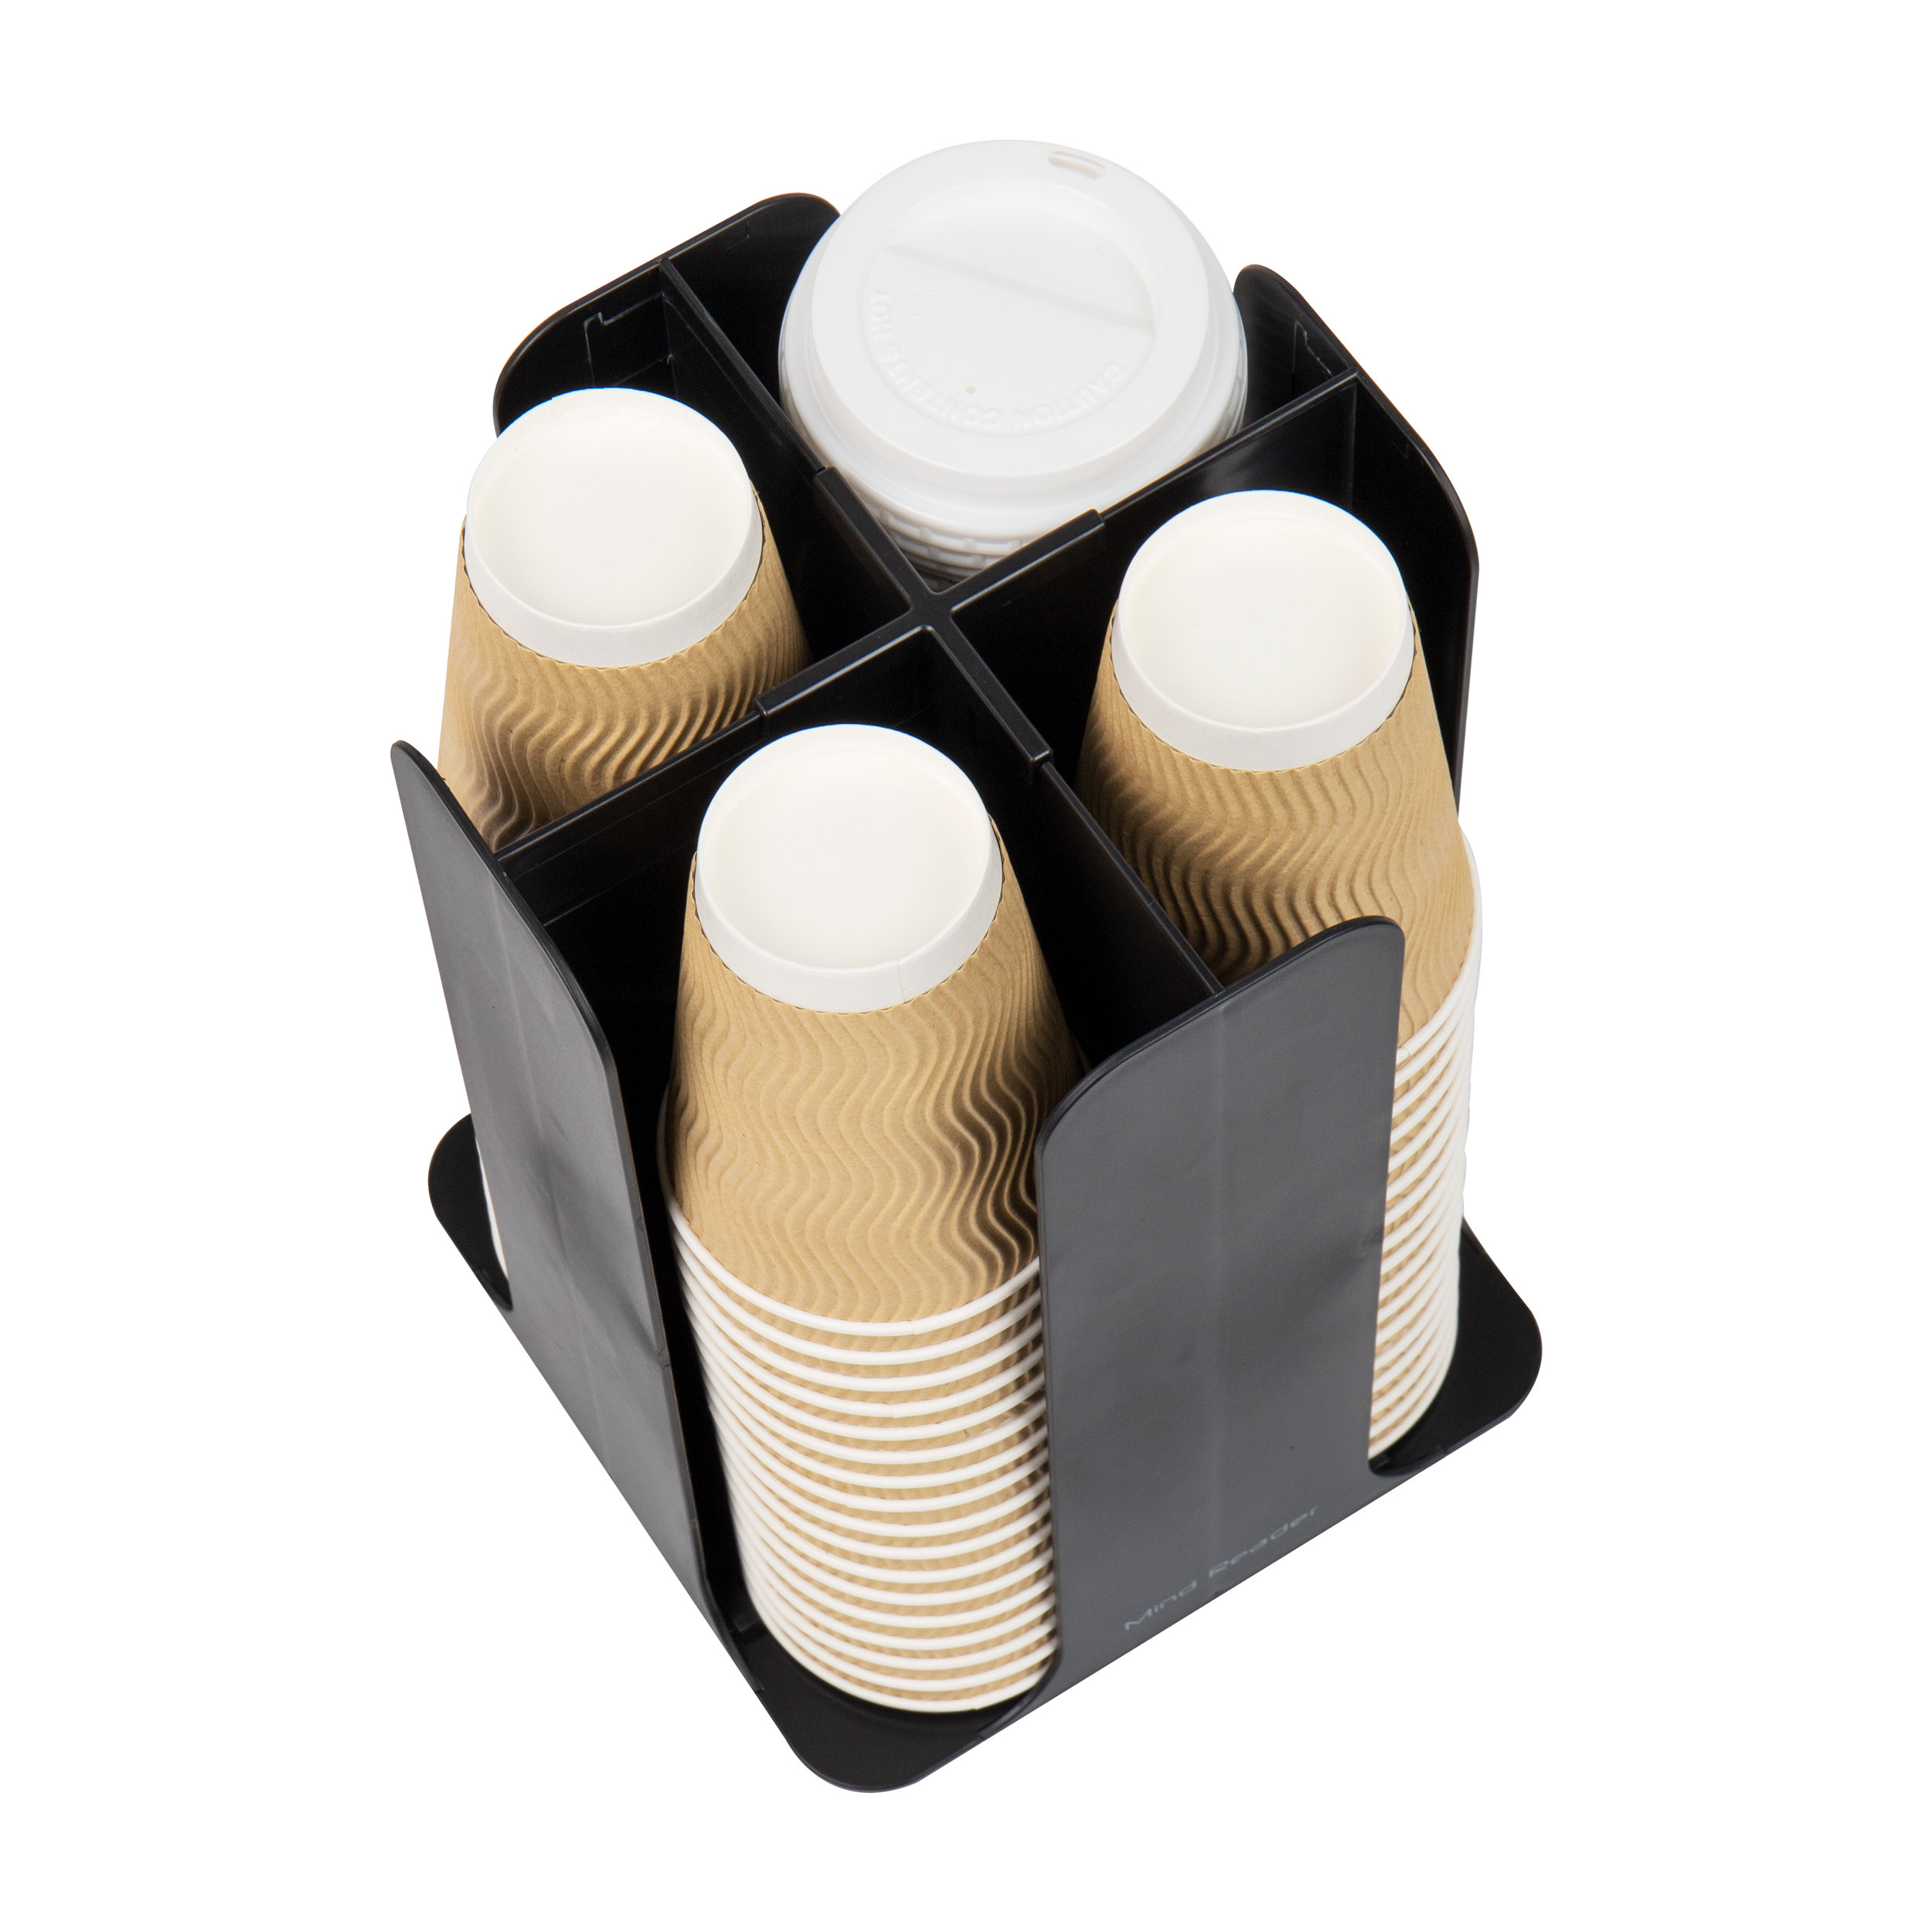 Mind Reader 4 Compartment Cup and Lid Holder Organizer Carousel - Black